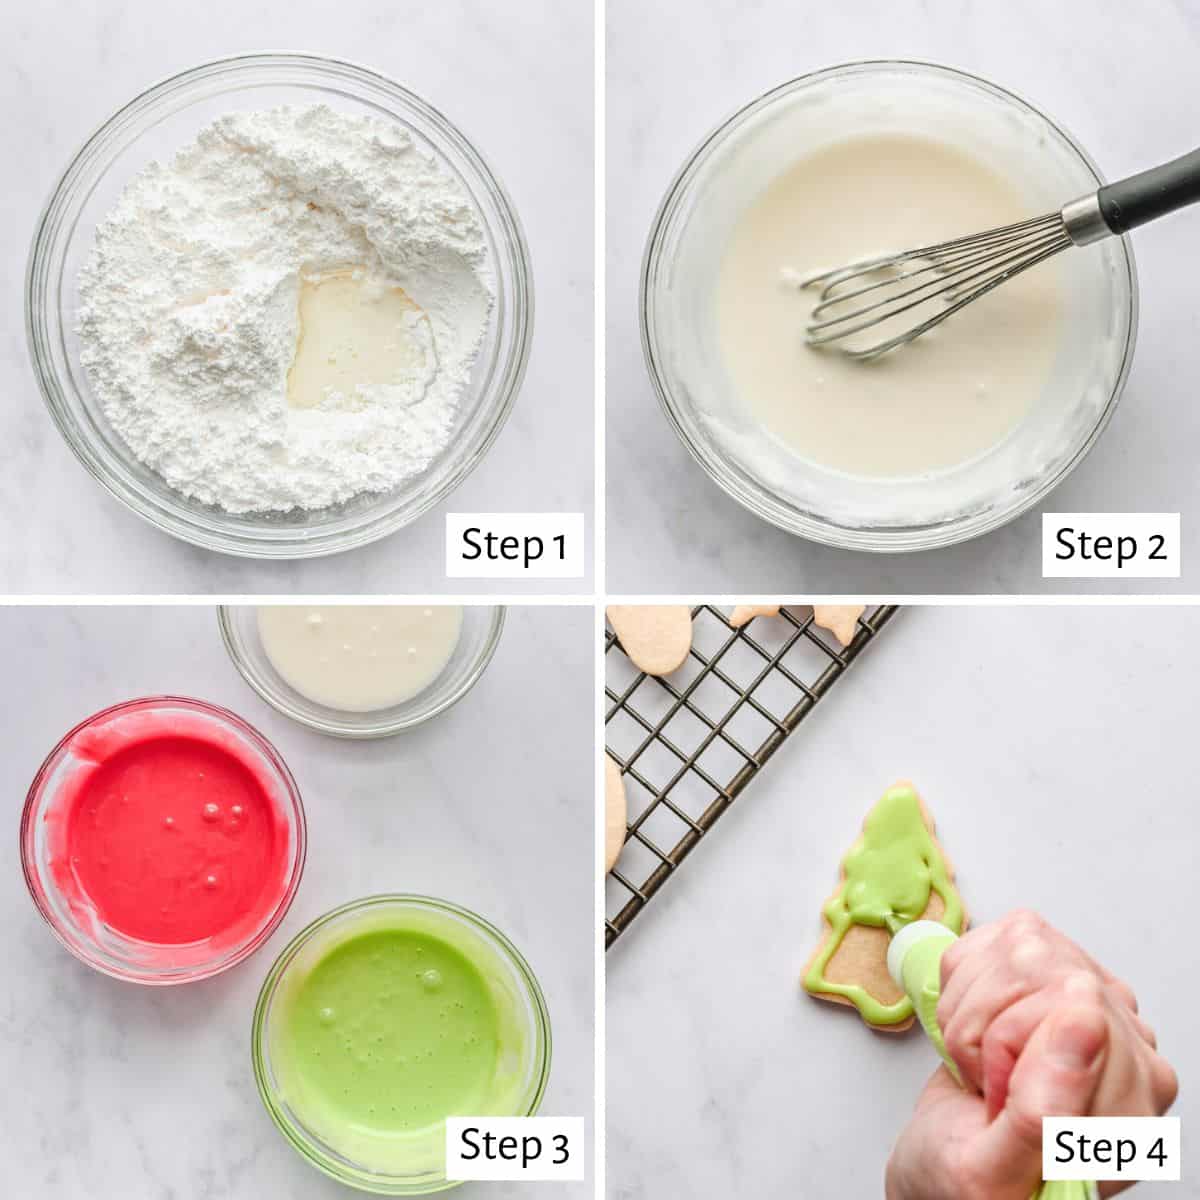 4 image collage making recipe: 1- powdered sugar and milk, peppermint extract, and cream in a bowl, 2- after whisking together into a smooth icing, 3- icing divided with food coloring added into 3 different colors, 4- piping green icing on a cut out christmas tree cookie.